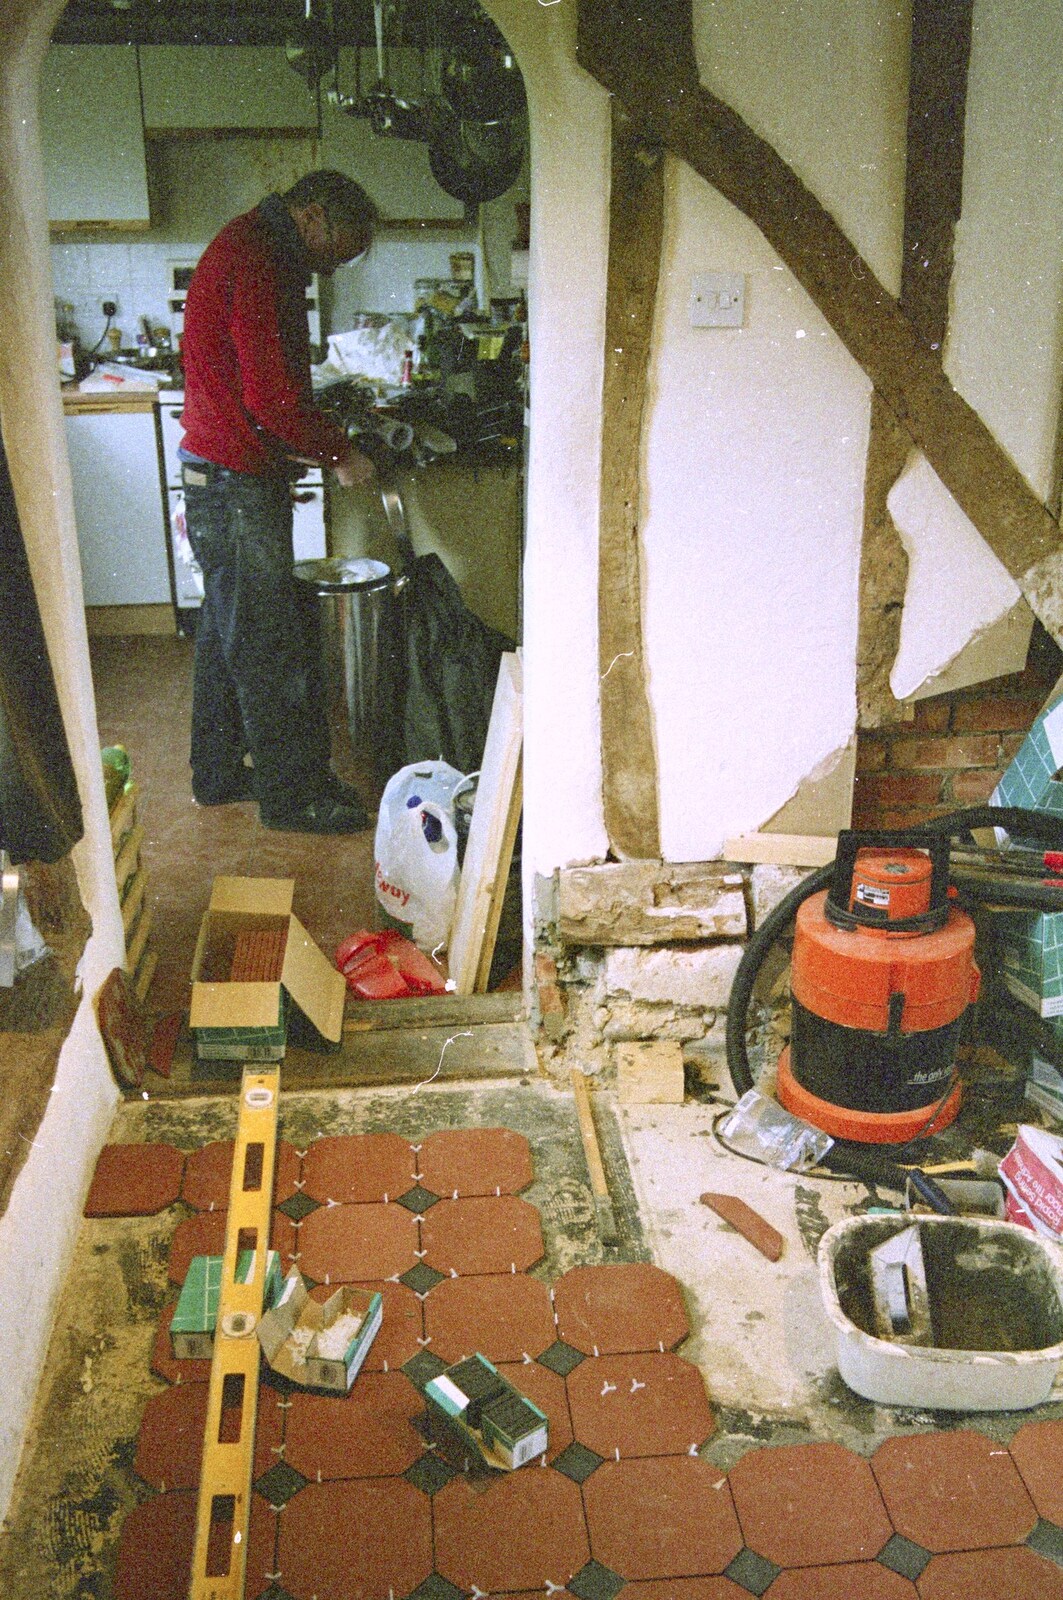 The Old Man potters around in the kitchen from 3G Lab, and Building a Staircase, Brome, Suffolk - 11th February 2001